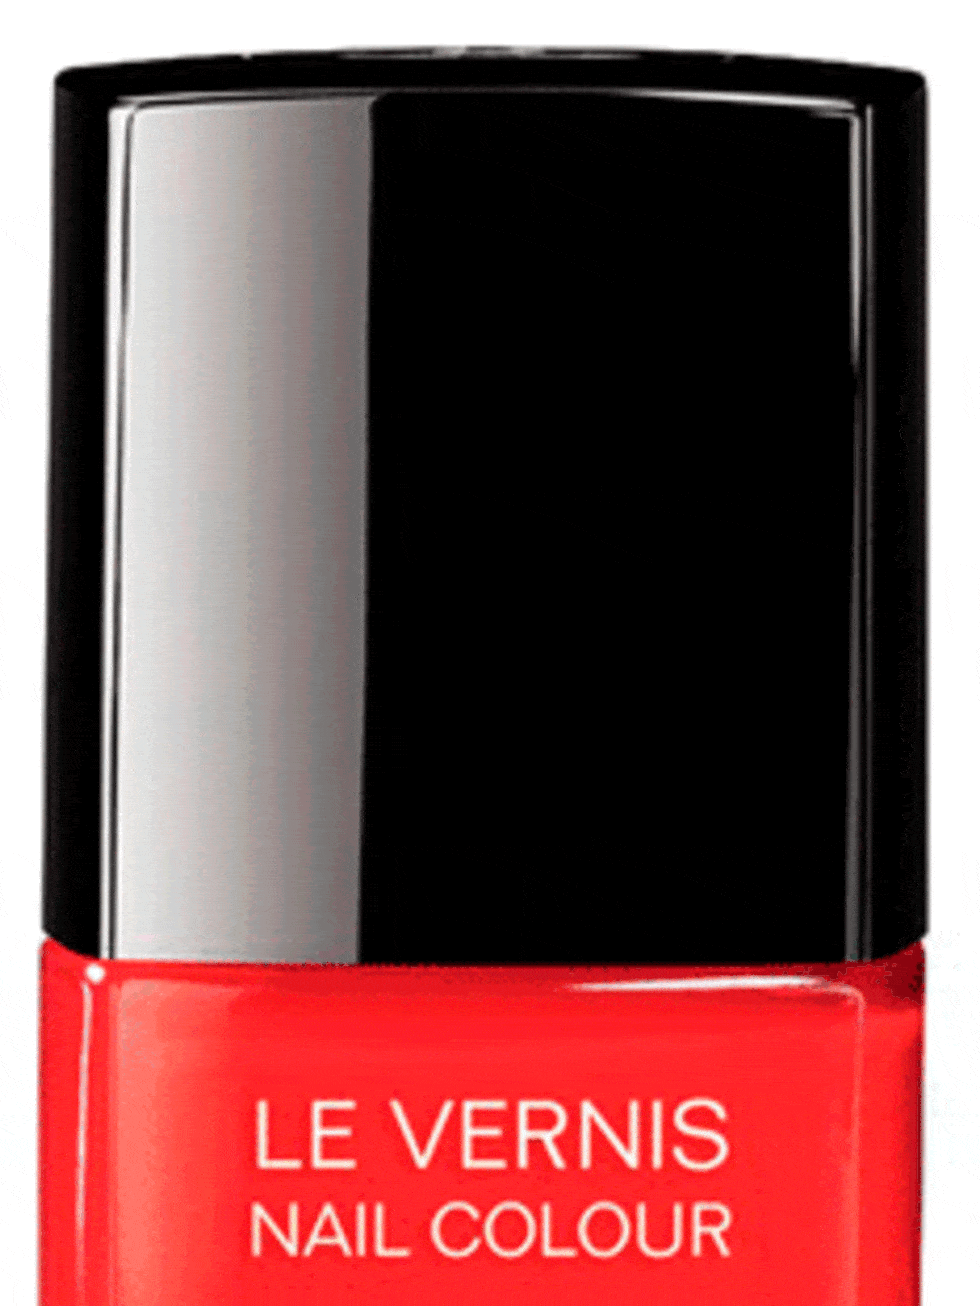 <p>Chanel Le Vernis Nail Colour in Coquelicot, £18.00, available from May 2015</p>